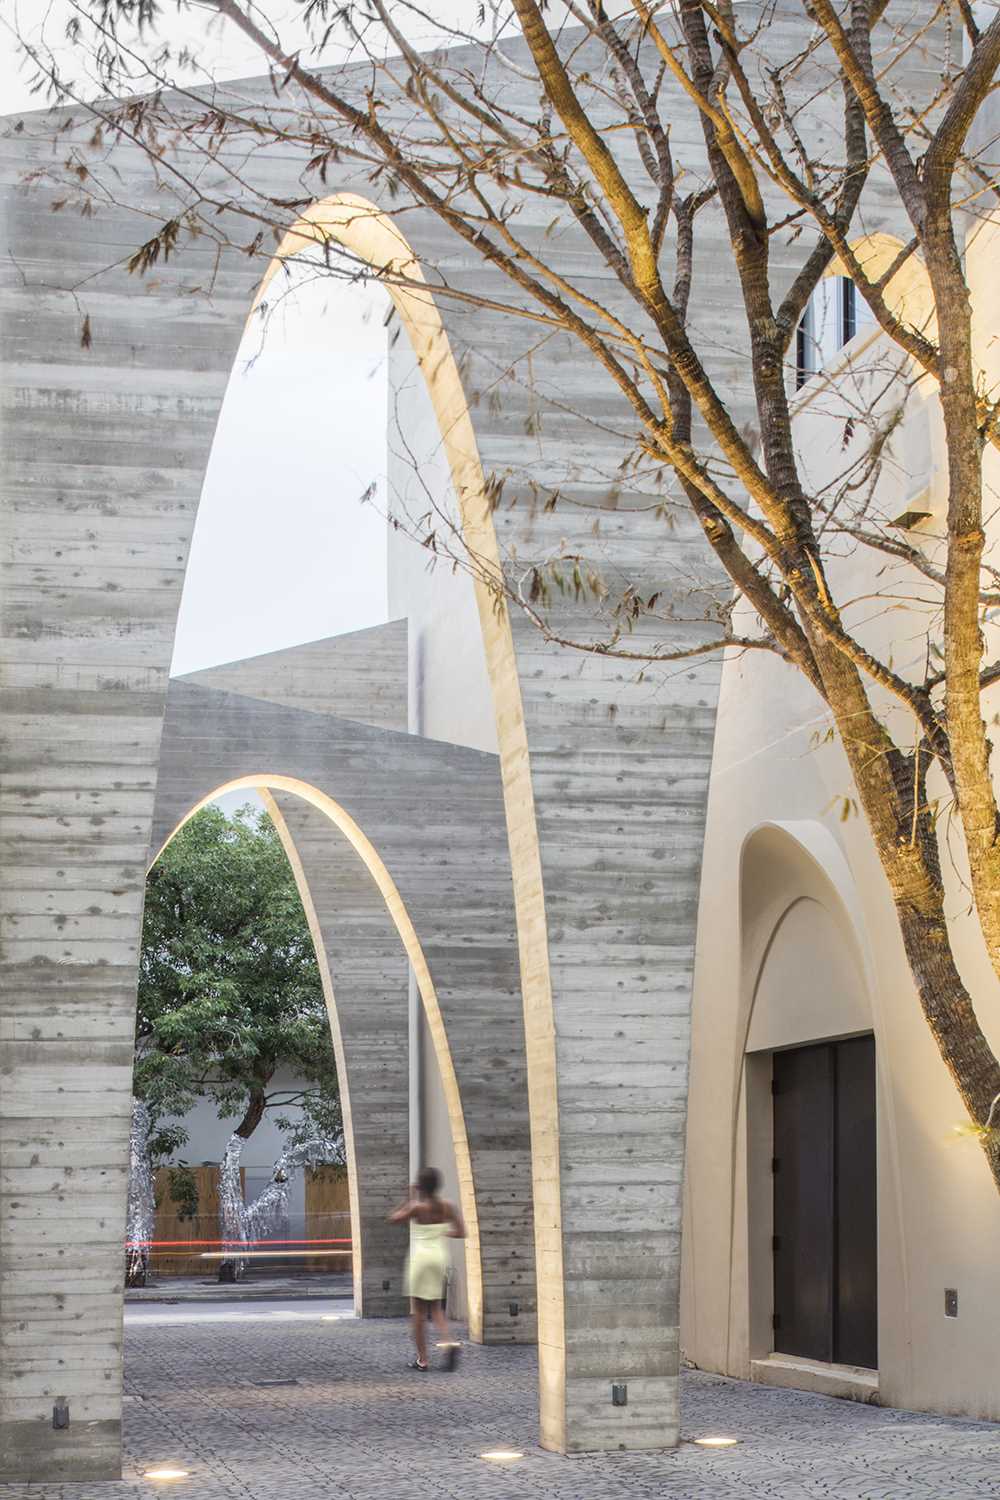 A series of arches were added to a nondescript alley to create an art installation that added life to the area.